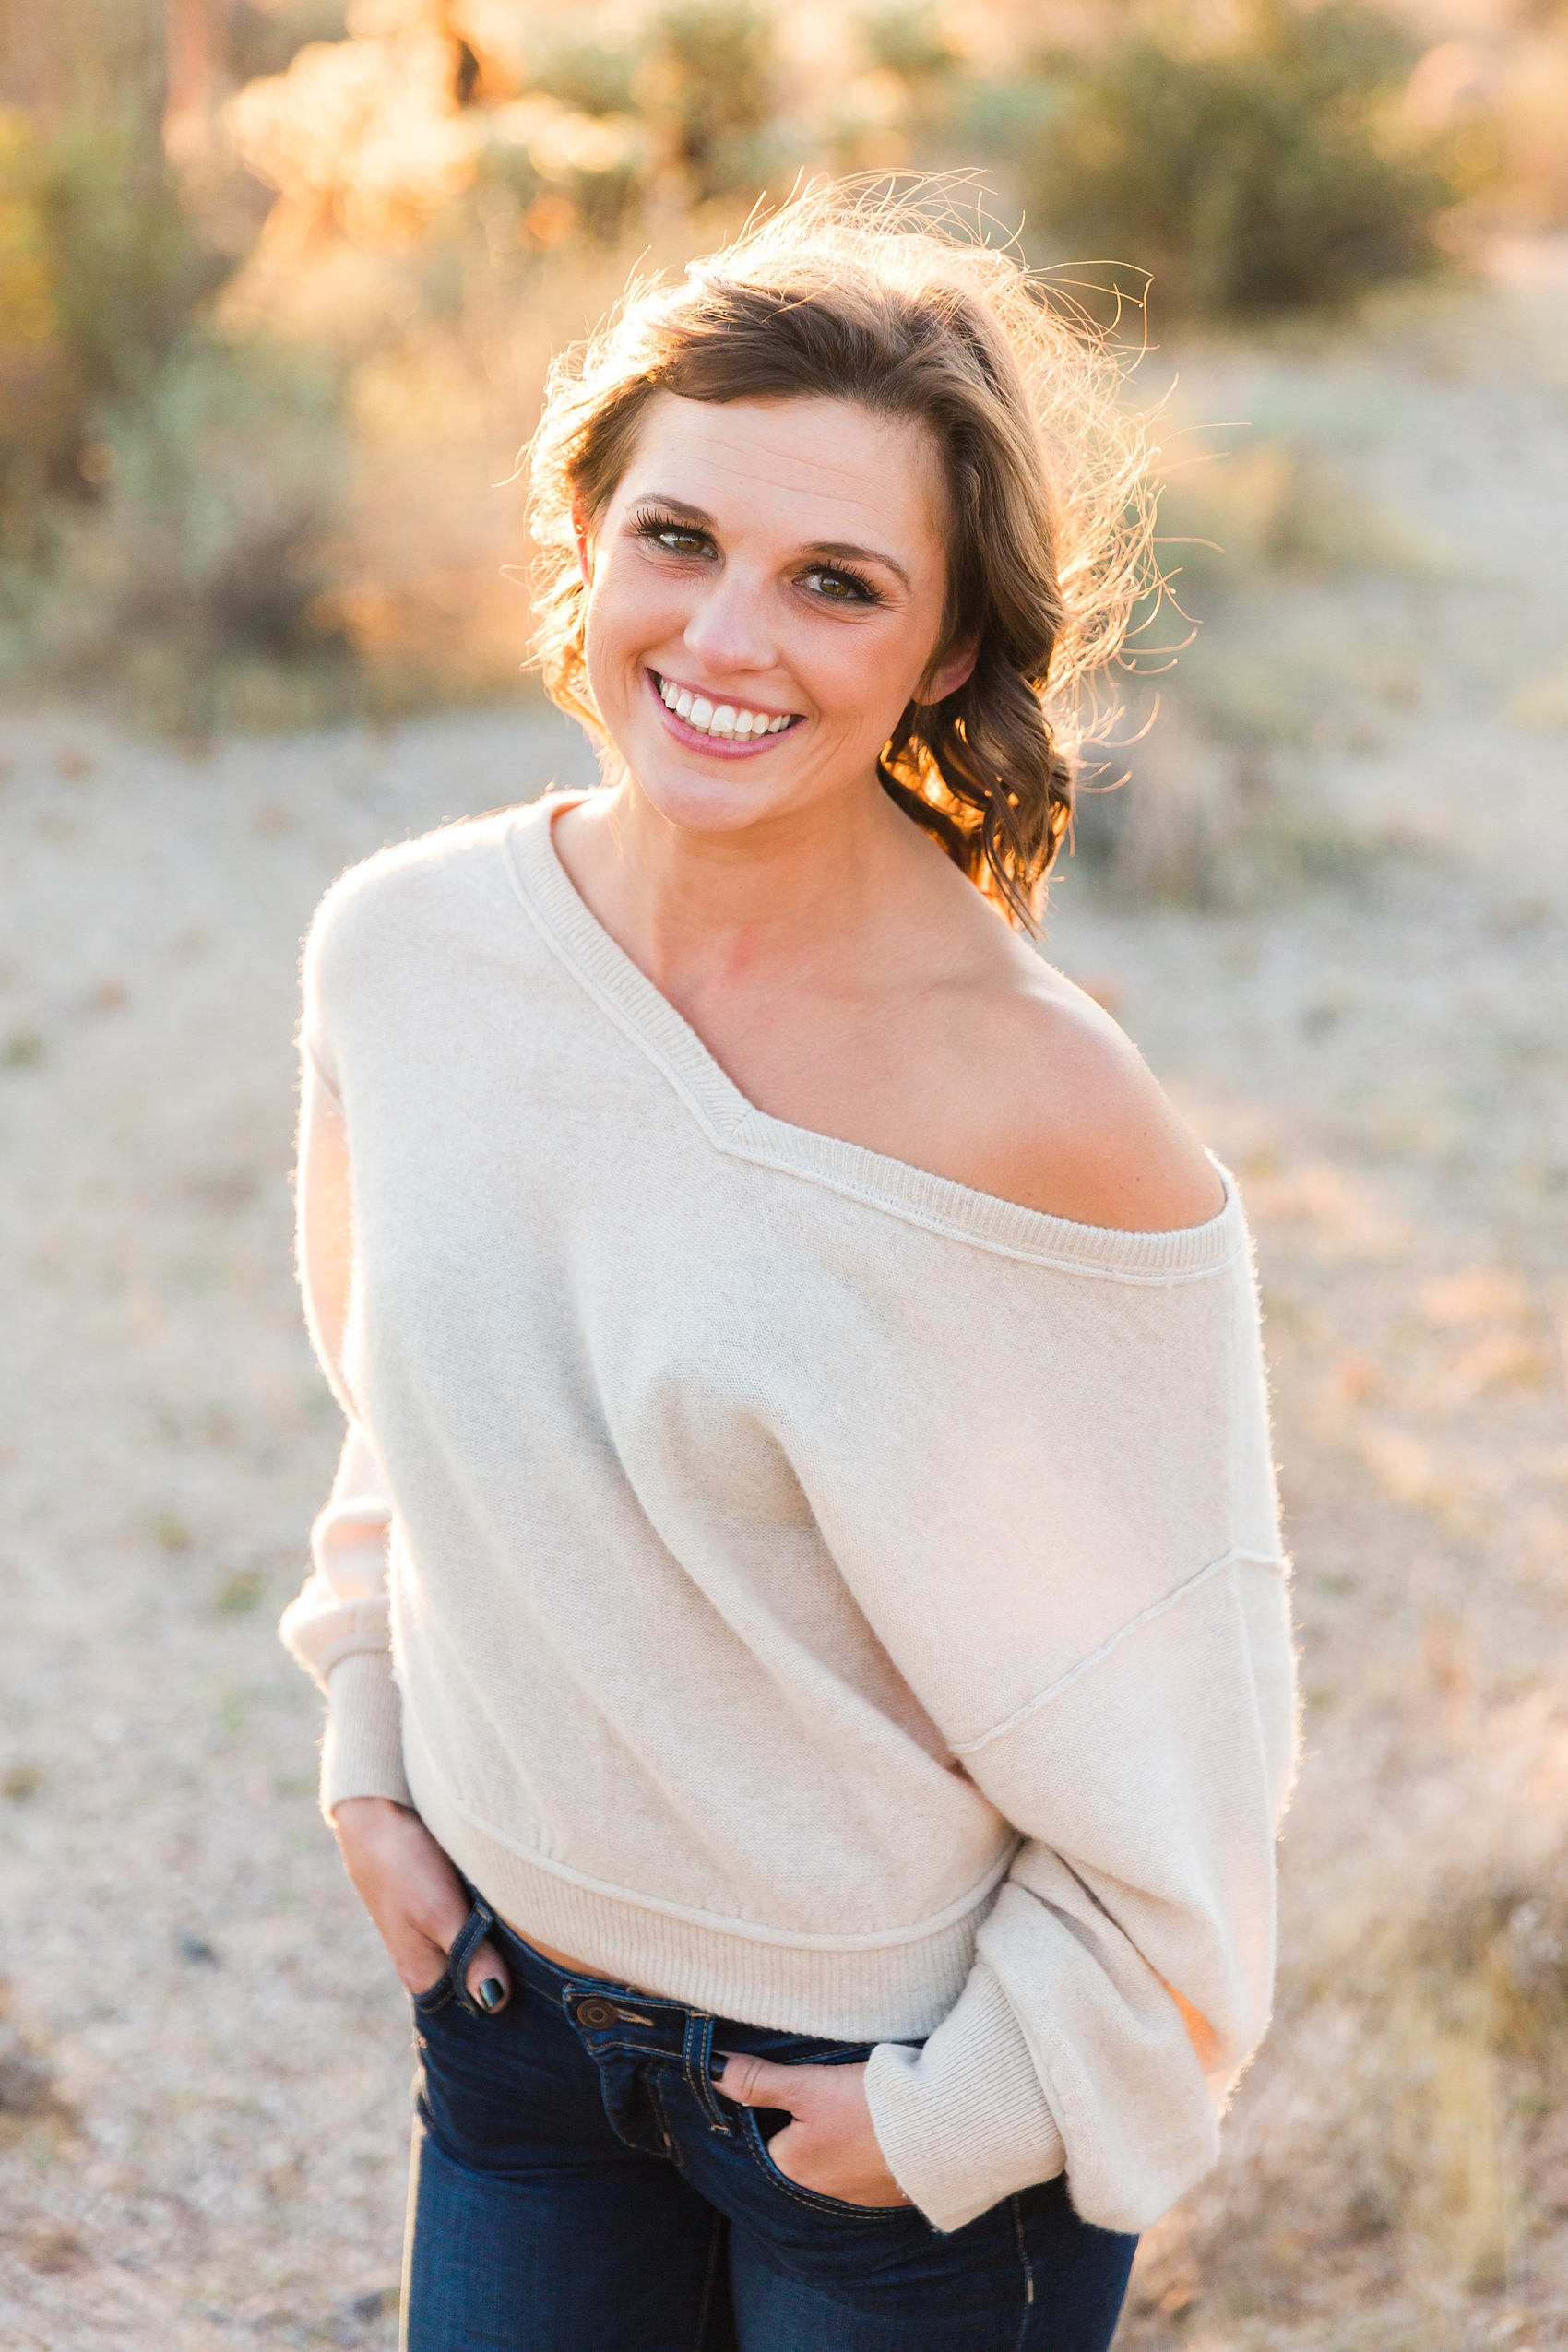 Leah Hope Photography | Scottsdale Phoenix Arizona | Desert Landscape Cactus Scenery | McDowell Mountains | Extended Family Pictures | Family Photos | What to Wear | Family Poses